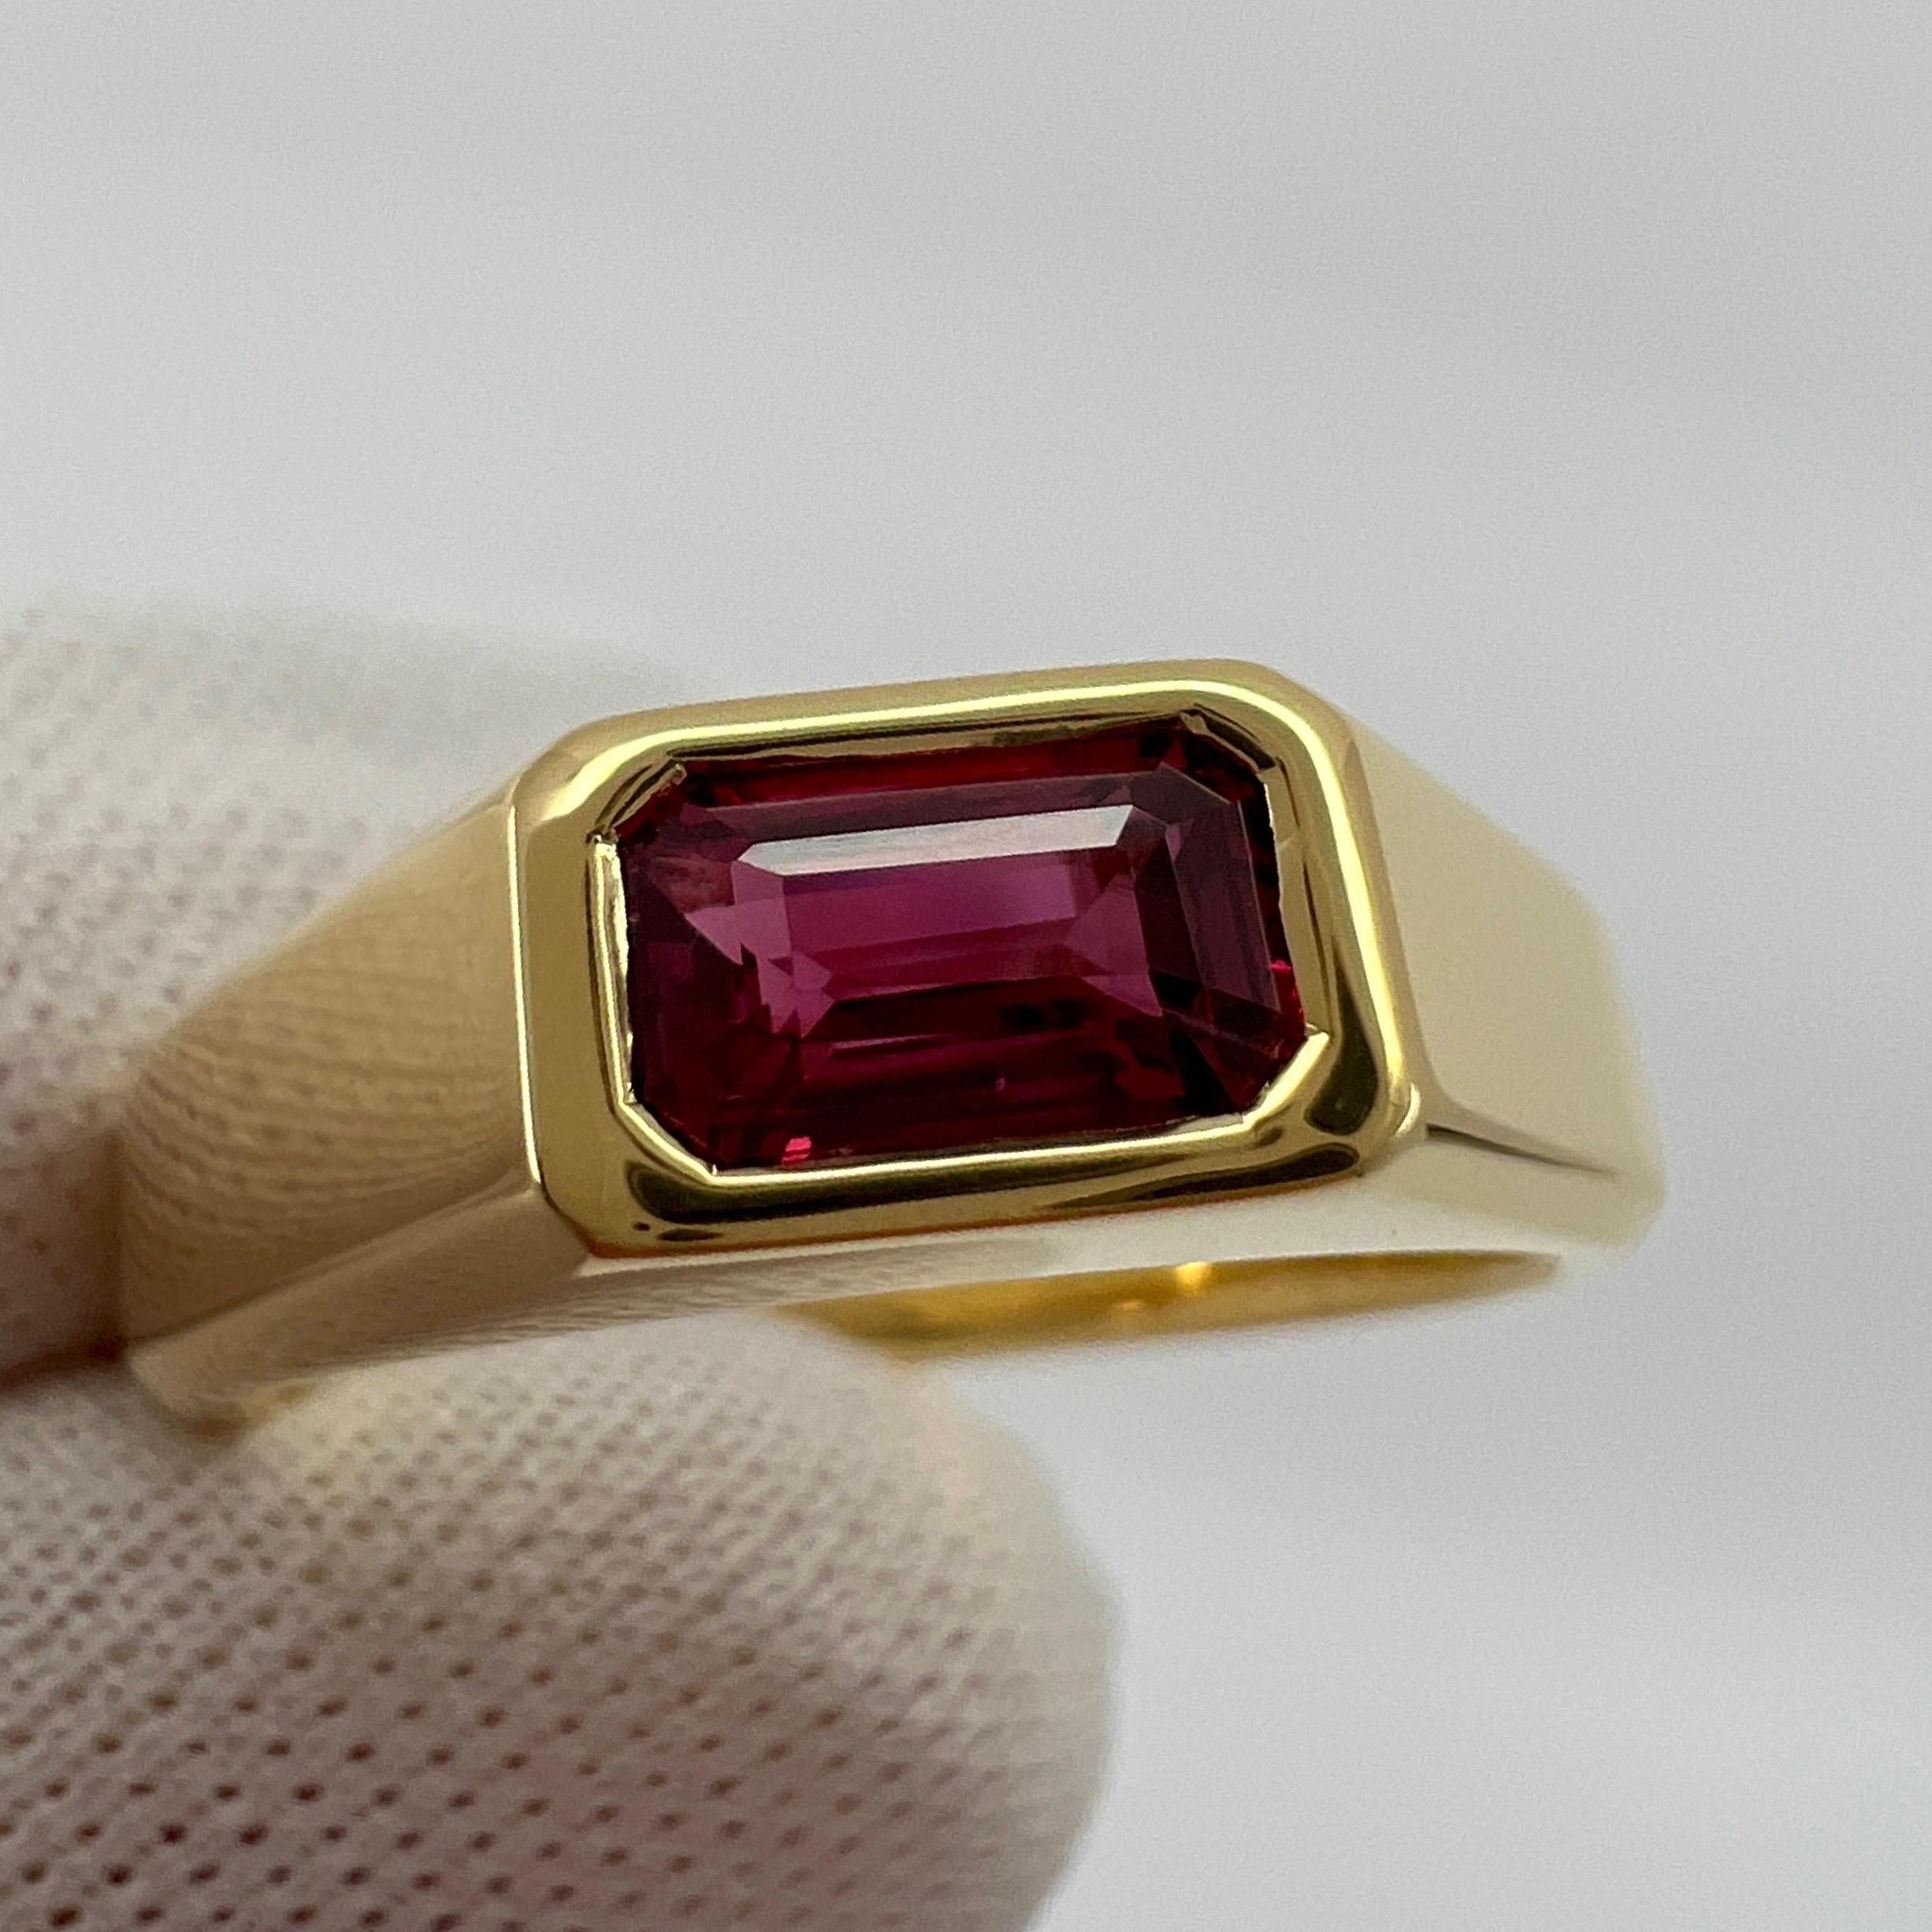 Certified Untreated Deep Red Emerald Cut Ruby 18k Yellow Gold Signet Style Ring 5